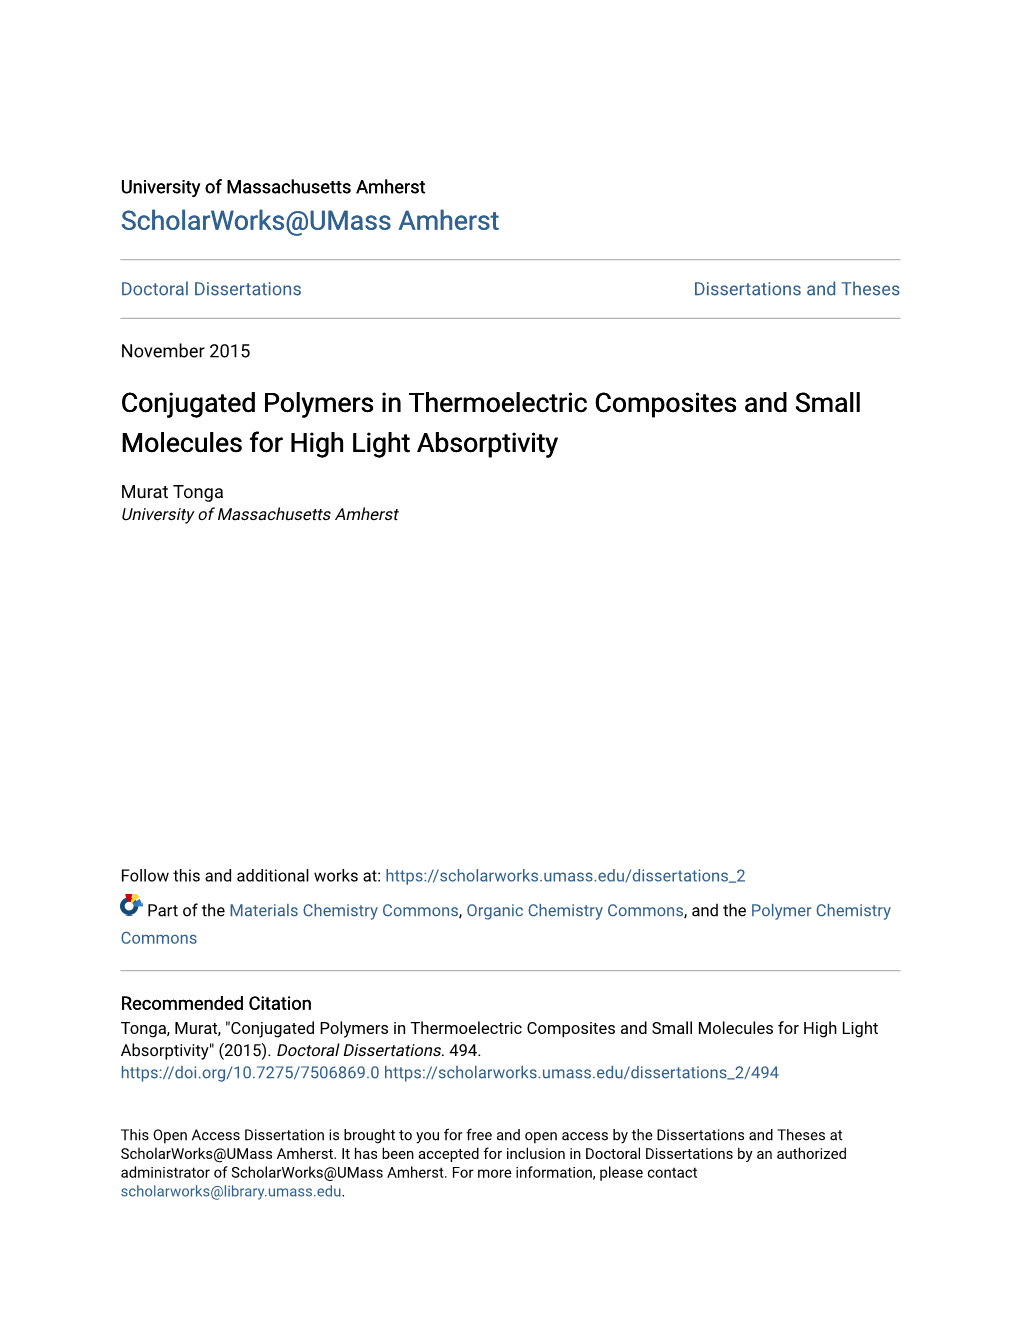 Conjugated Polymers in Thermoelectric Composites and Small Molecules for High Light Absorptivity